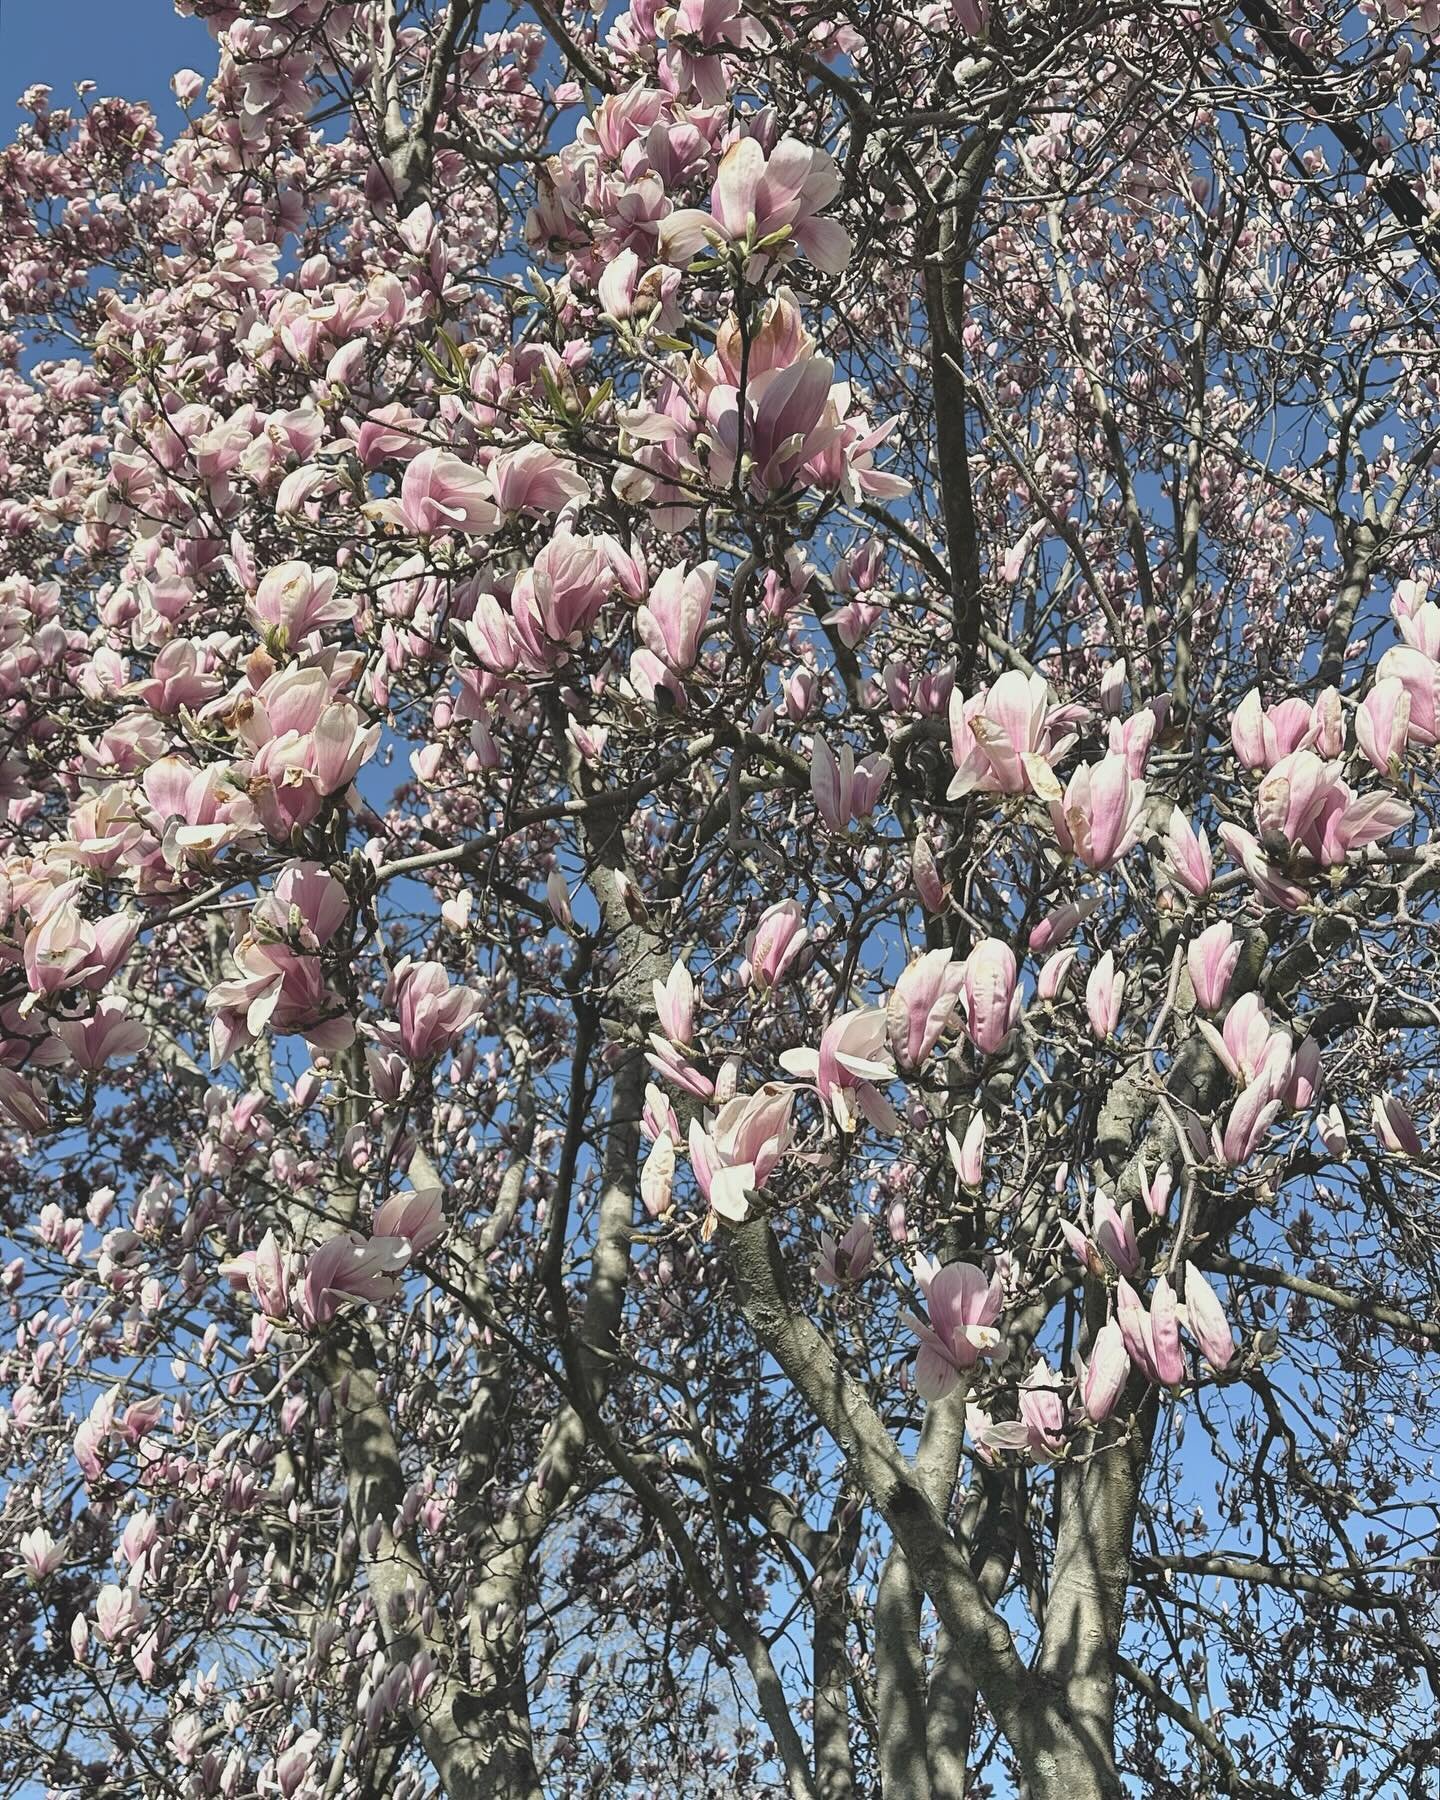 Waking up grateful for so much this morning&hellip; our amazing customers and supporters, longer spring days, and beautiful trees like this magnolia 🤍 Happy Sunday, open 11-4 today 💙